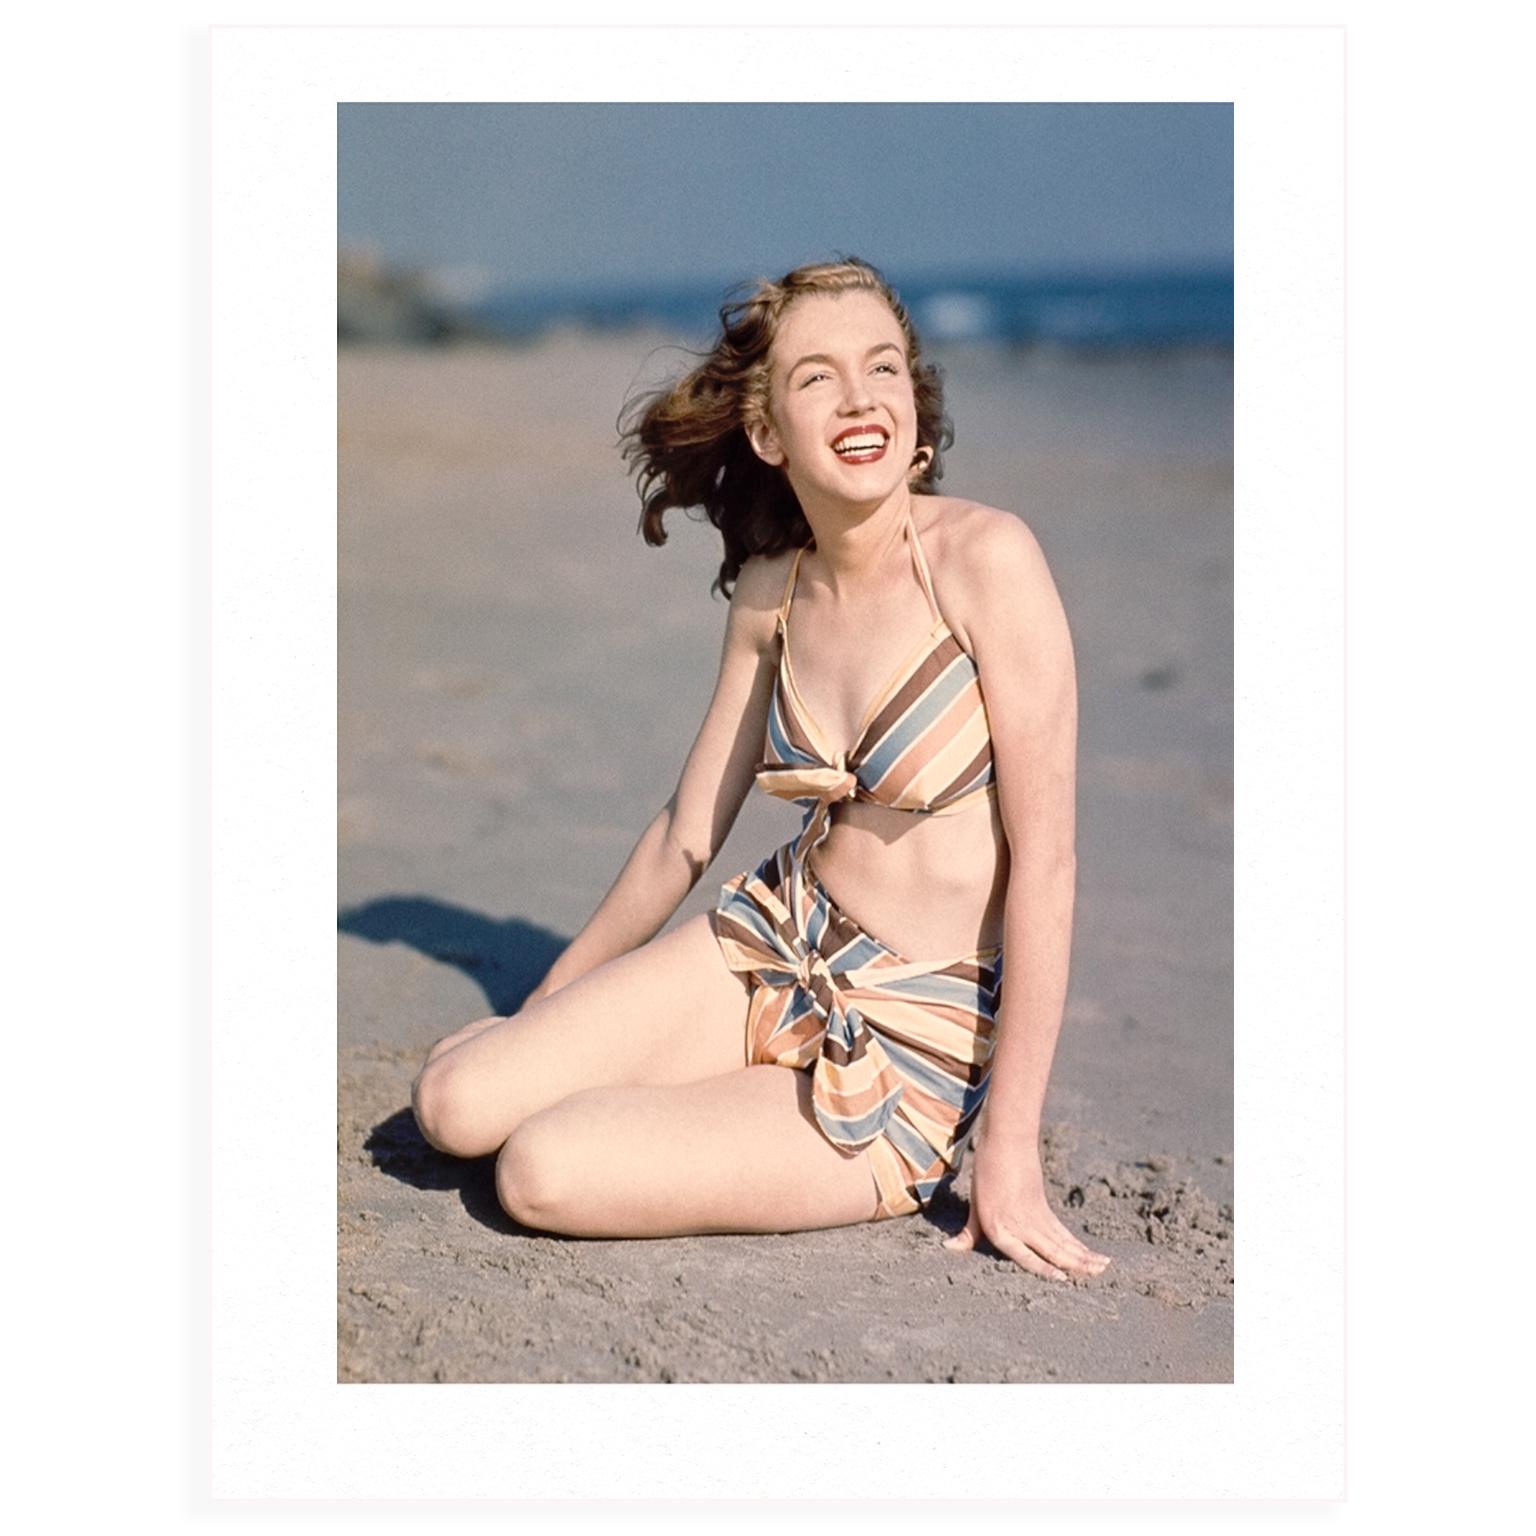 For the first time, we are offering beautiful, premium-quality, colour prints, measuring 25 x 20in (63.5 x 51cm) from Marilyn’s historic photoshoot with celebrated photographer, Joseph Jasgur. Each print has been meticulously produced on Hahnemühle